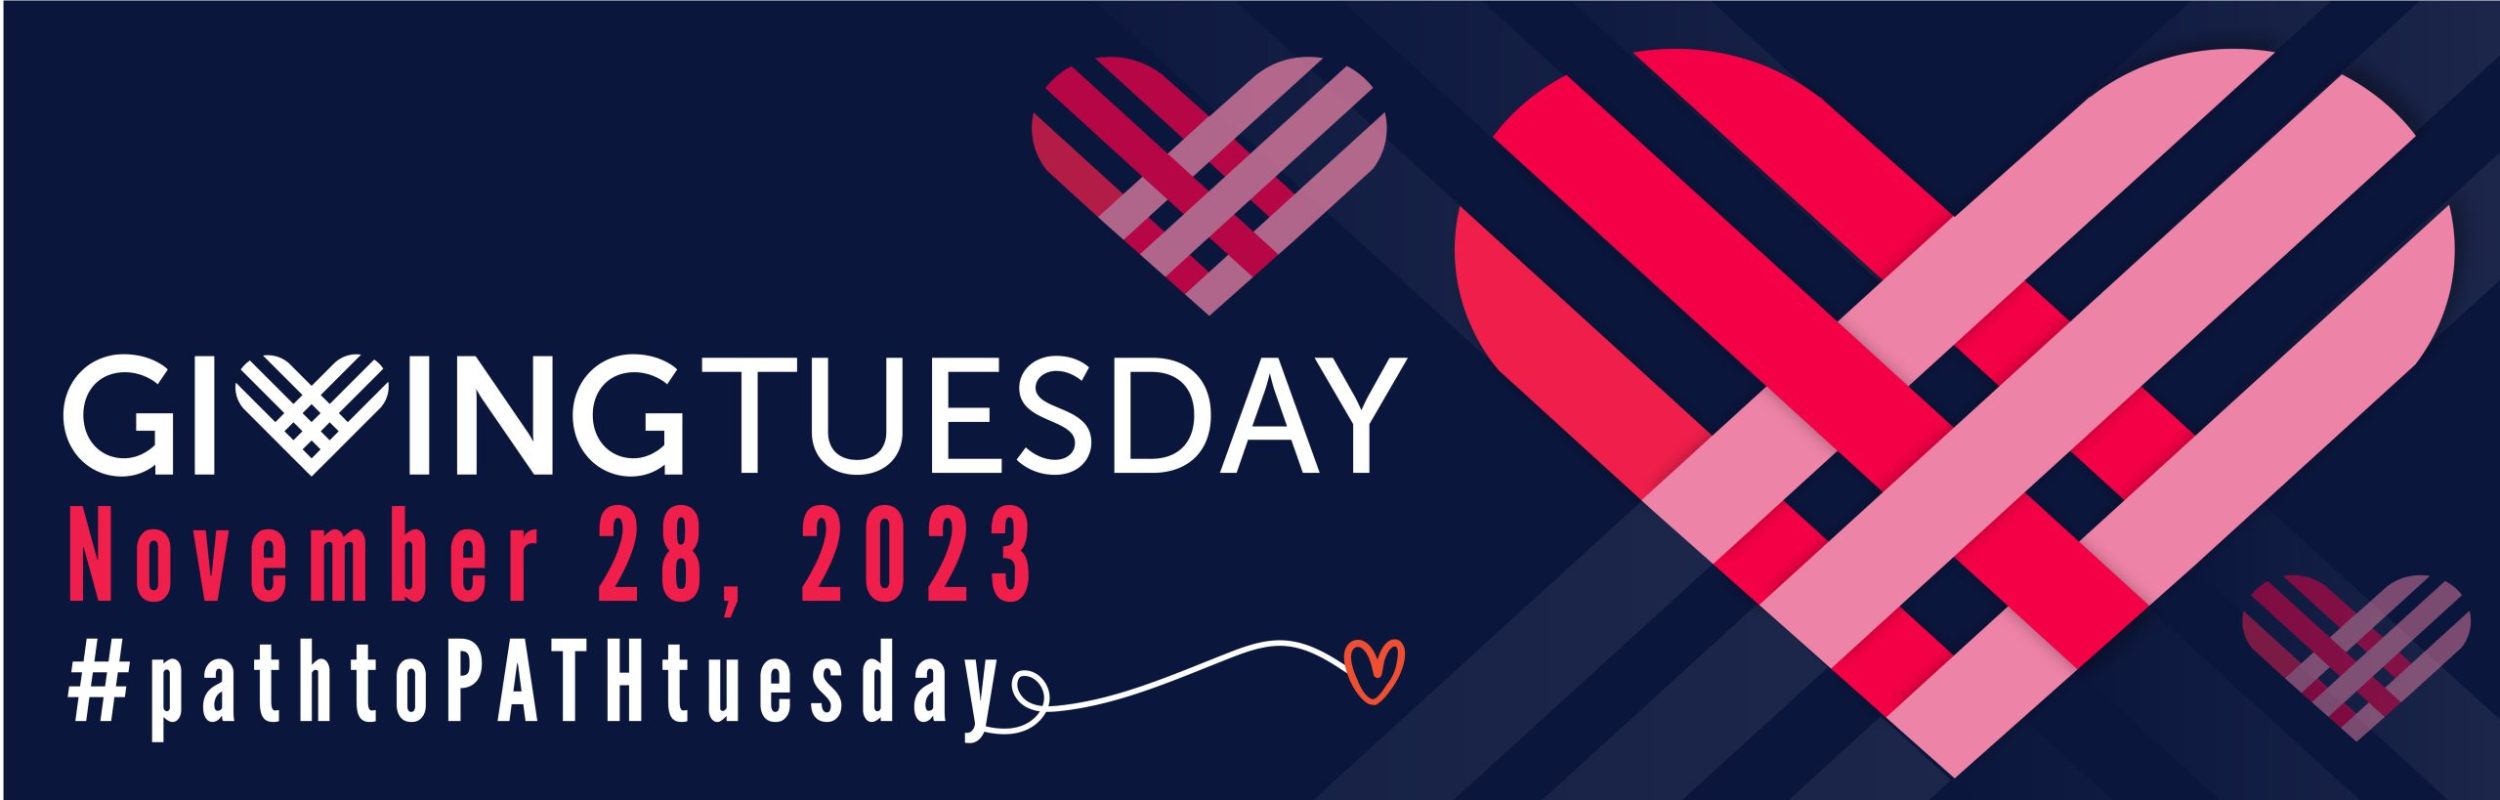 2500 x 800 px Giving Tuesday web header image